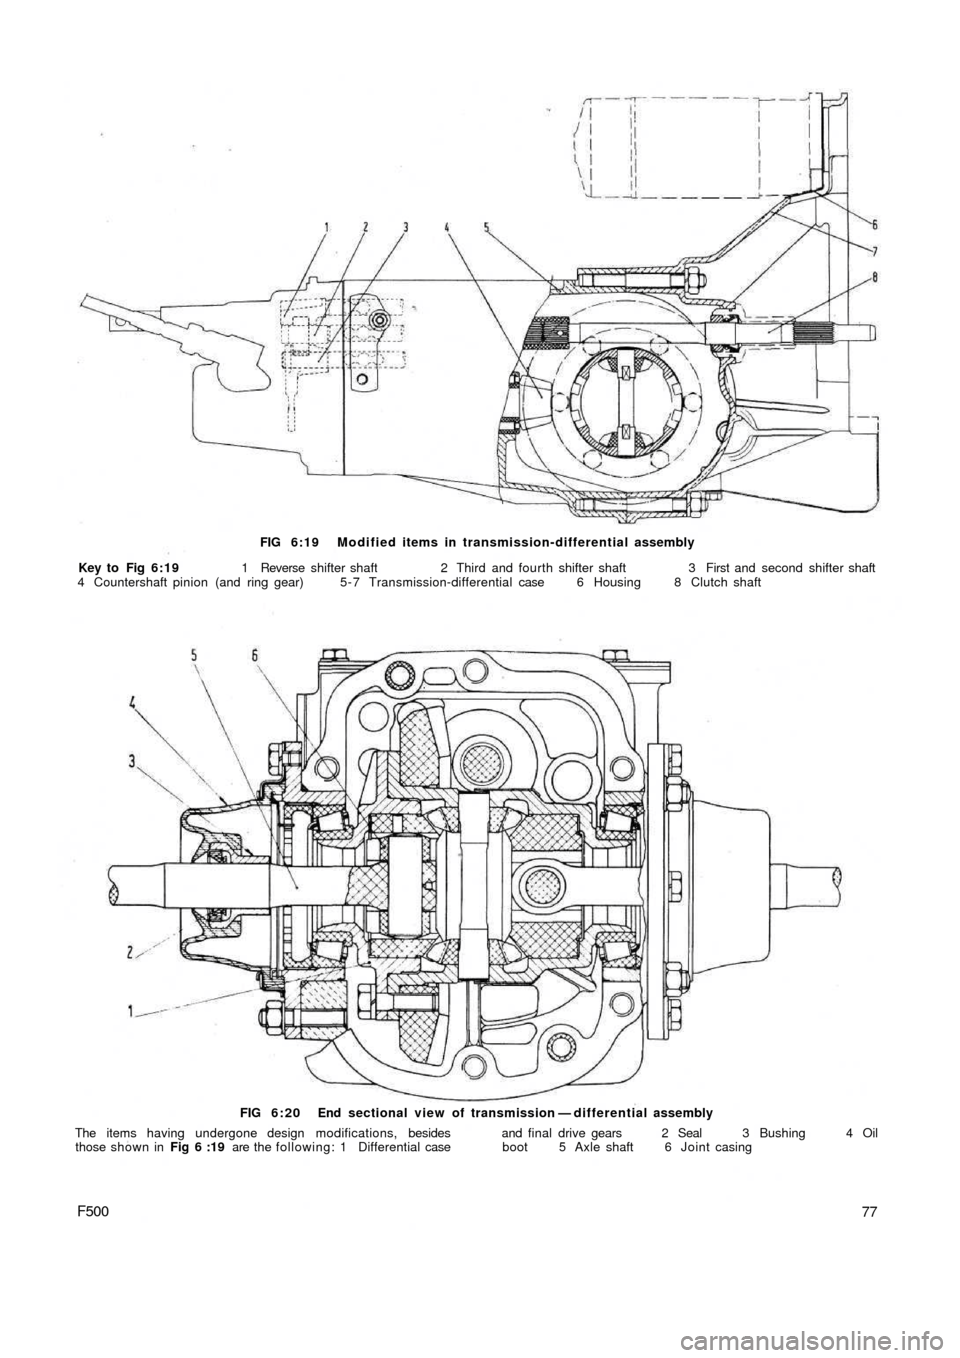 FIAT 500 1964 1.G Repair Manual FIG 6:19 Modified items in transmission-differential assembly
Key to  Fig  6:19 1 Reverse shifter shaft  2 Third and fourth shifter shaft  3 First and second shifter shaft
4 Countershaft pinion (and r